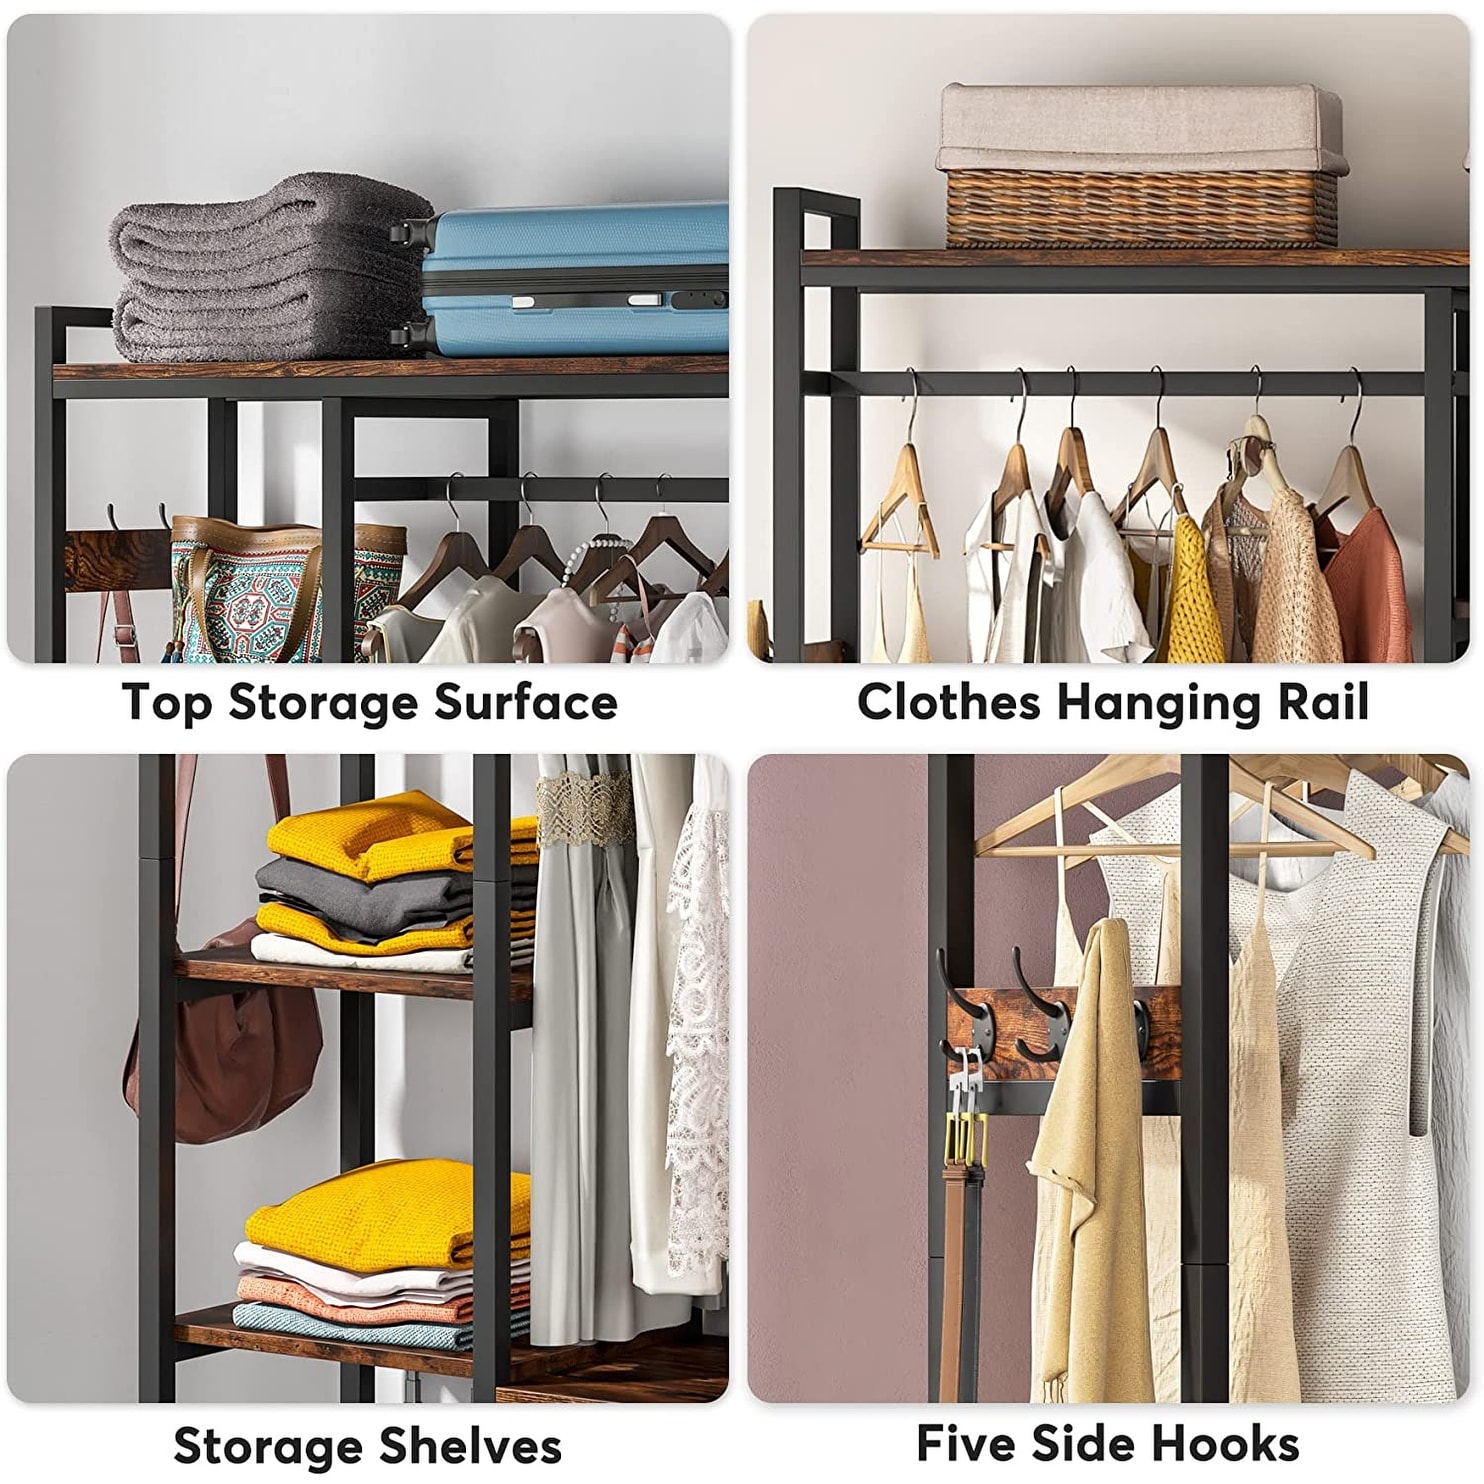 https://ak1.ostkcdn.com/images/products/is/images/direct/c5a0a5eeb8437745bd48e990ba8b79c79eab6db1/Freestanding-Closet-Organizer%2C-Clothes-Rack-with-Drawers%2C-Garment-Rack-Hanging-Clothing-Wardrobe-Storage-Closet-for-Bedroom.jpg